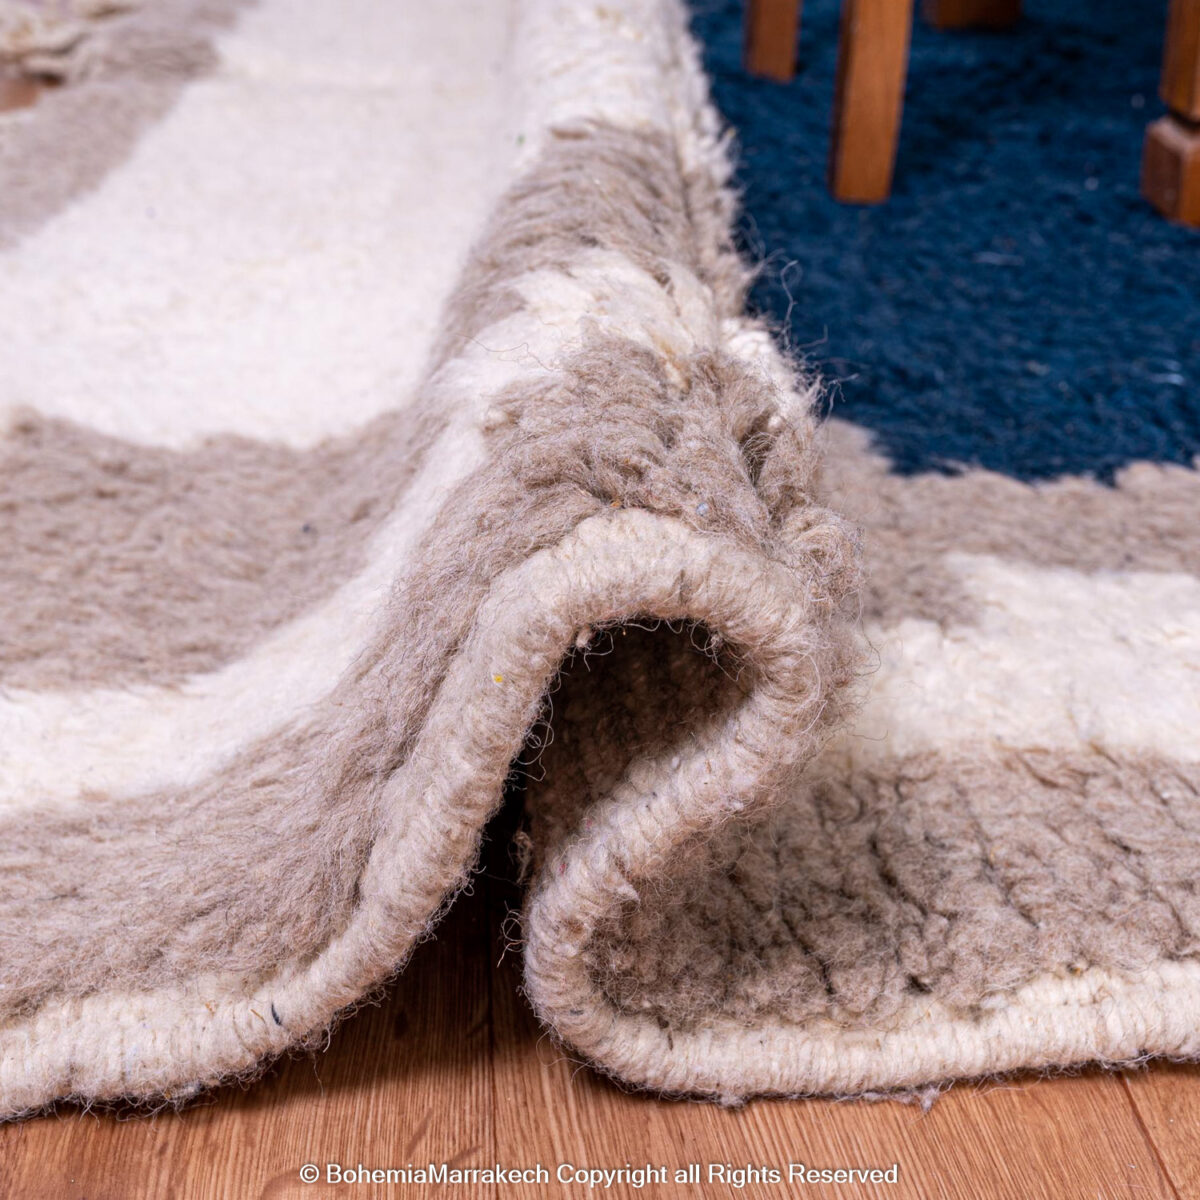 washable rugs, rugs that are washable, washable carpet rugs, 8x10 rugs, runner rugs, 8x10 area rugs, washable area rugs, washable floor rugs, area rugs that are washable, kids rugs, boho rug, ruggable's, outdoor rugs, ruggable rugs, kitchen rugs, living room rug, rugs in a living room, kitchen with rug, rug sizes, carpet sizes, rug dimensions, rug measurements, carpet rug sizes, indoor outdoor rugs, outdoor patio rugs, outdoor rugs for porch, indoor and outdoor rugs, washable accent rugs, porch rugs outdoor, exterior patio rugs, kitchen runner rugs, kitchen rugs and runners, area rug for living room, kitchen carpet runner, large room rug, carpet runner in kitchen, kitchen with runner rug, patio rugs, children's rugs, rug patio, machine washable rugs, washable runner rugs, kitchen runner, machine washable area rugs, runner washable rugs, washable carpet runners, machine washable carpet, washable rugs and runners, machine washable floor rugs, rugs washable runners